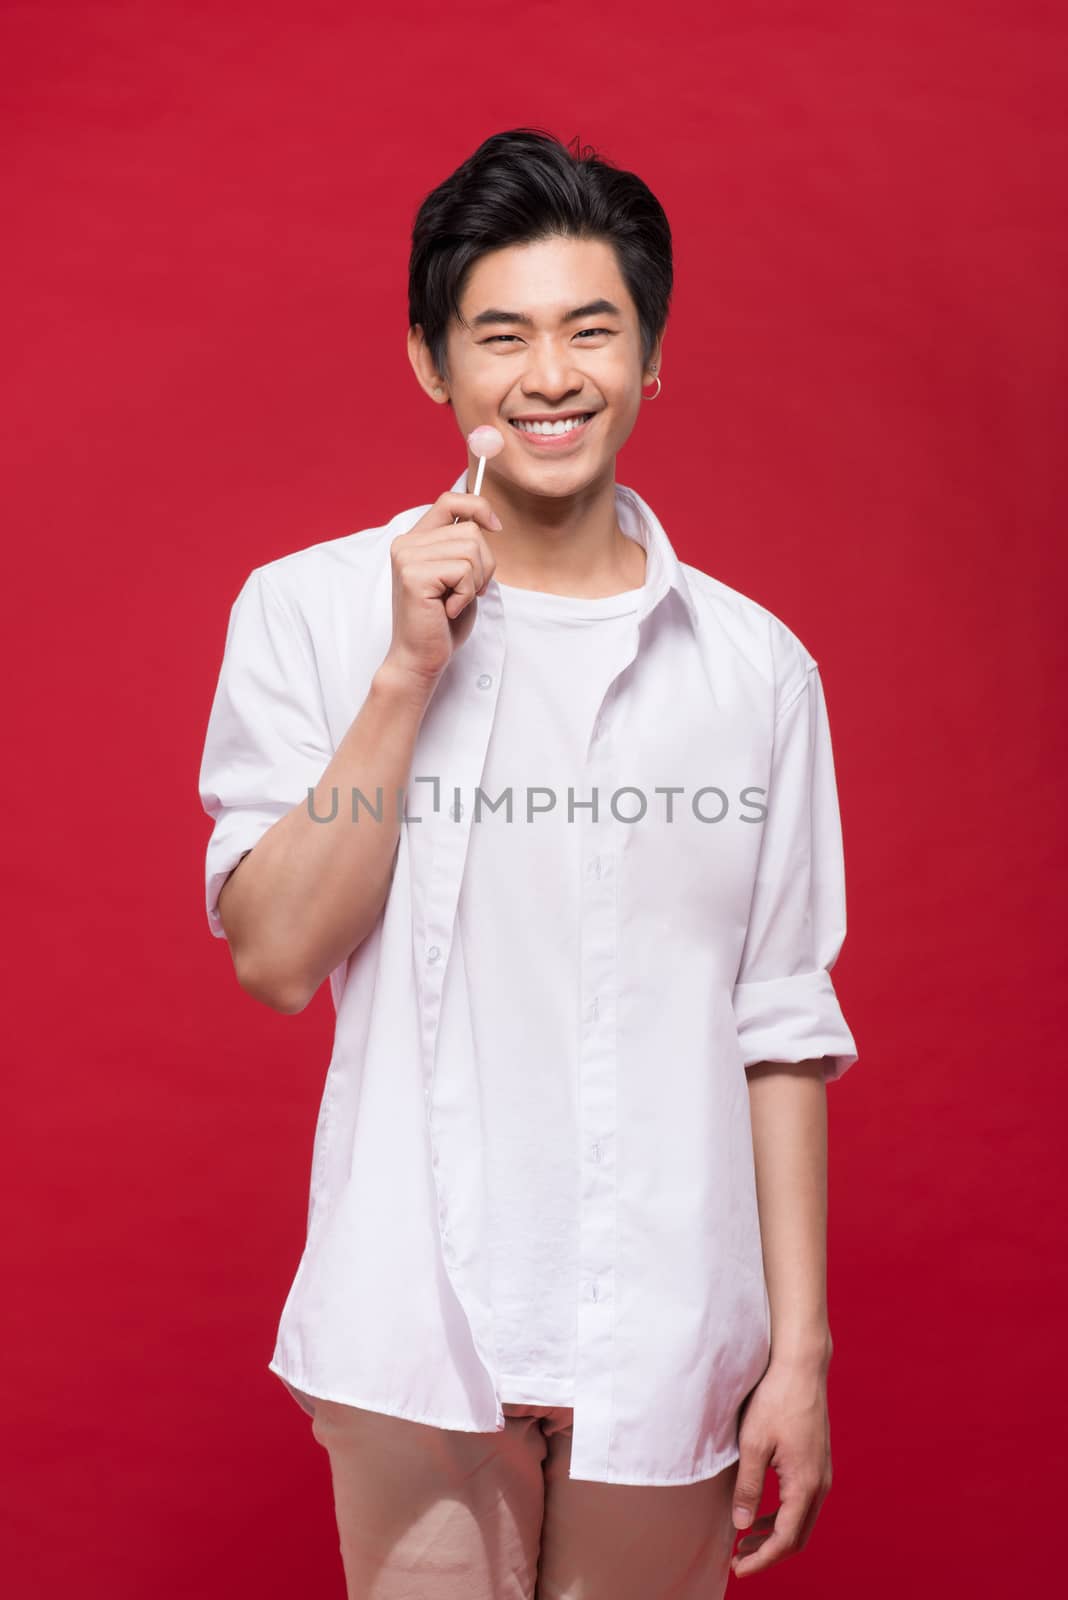 Portrait of a young stylish asian man licking a shiny lollipop over red background.